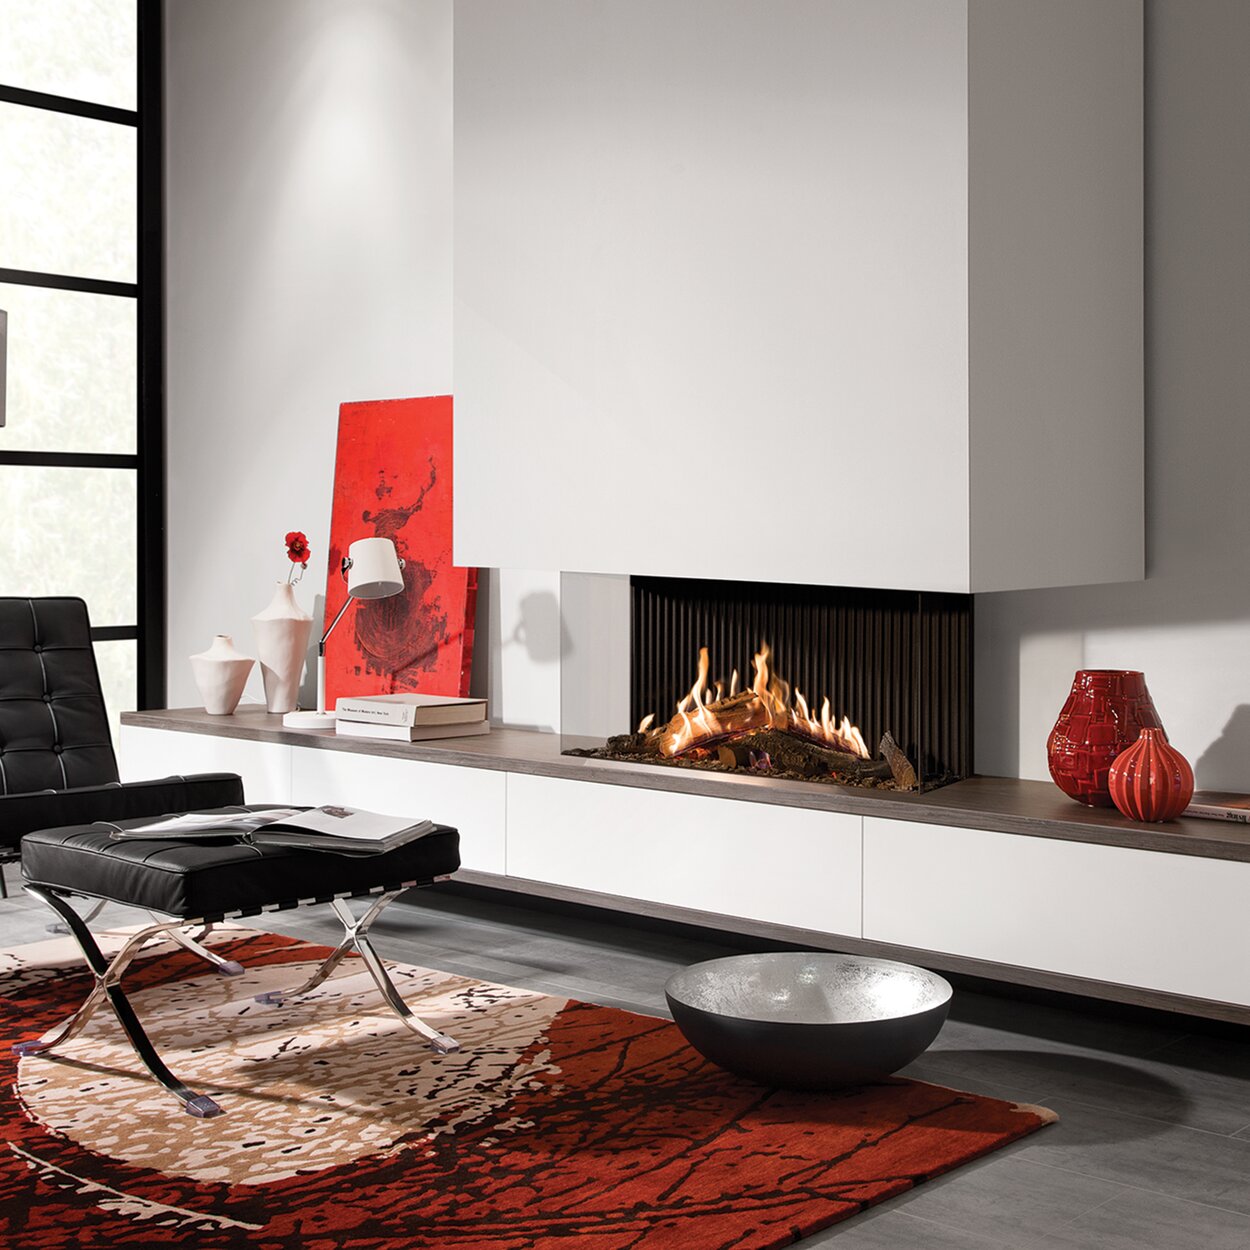 Gas fireplace GP115/55S 3-sided glazed built into white wall in modern living room with leather armchair